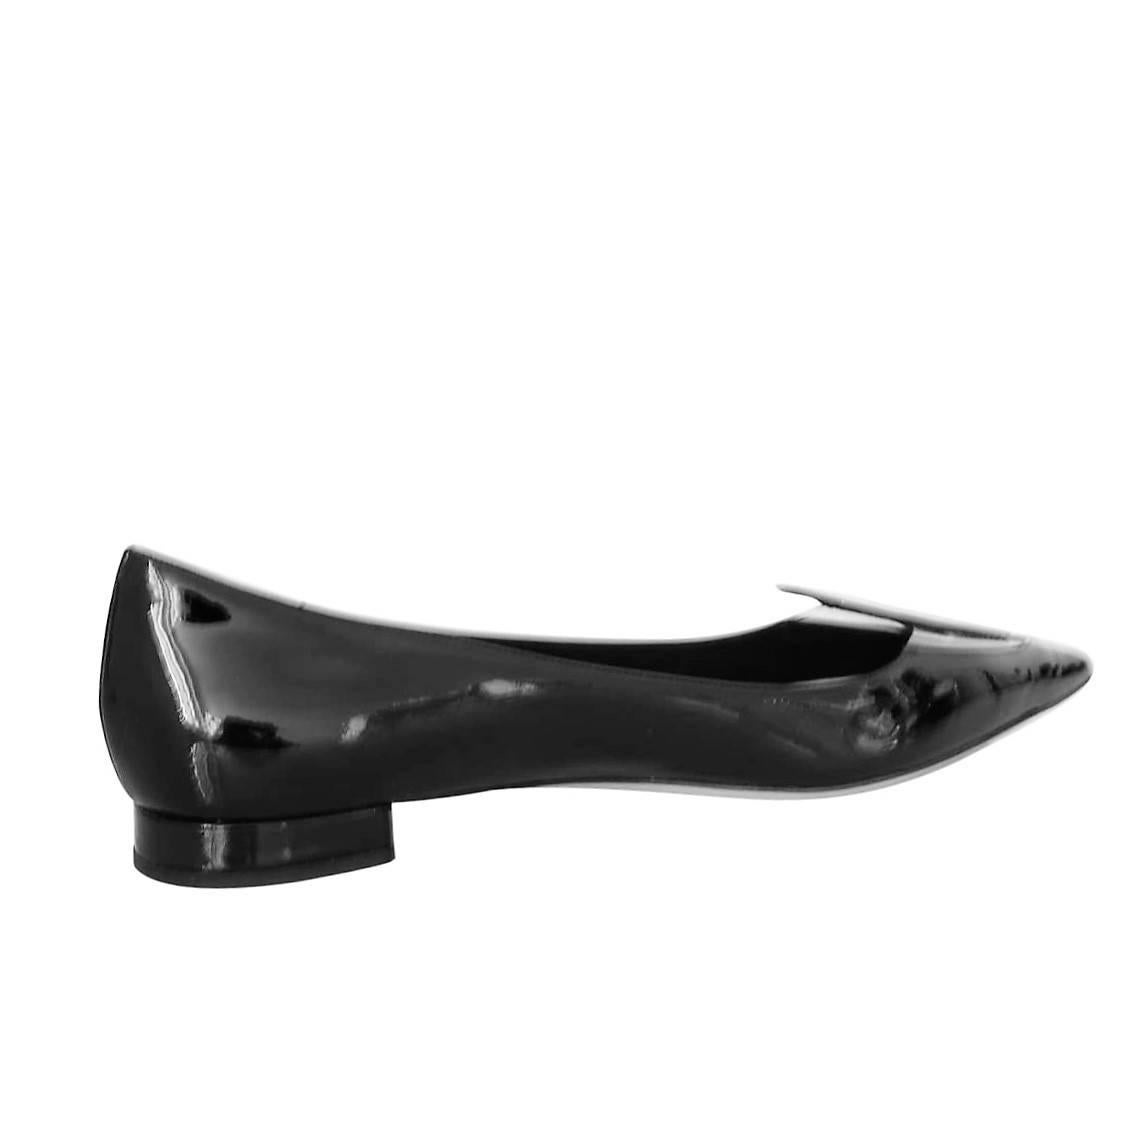 Very classy and elegat Miu Miu ballerina flat
Patent leather
Black color
Semi transparent top
Heel height cm 2 (0.78 inches)
Size italian 40
Made in Italy
Worldwide express shipping included in the price !
